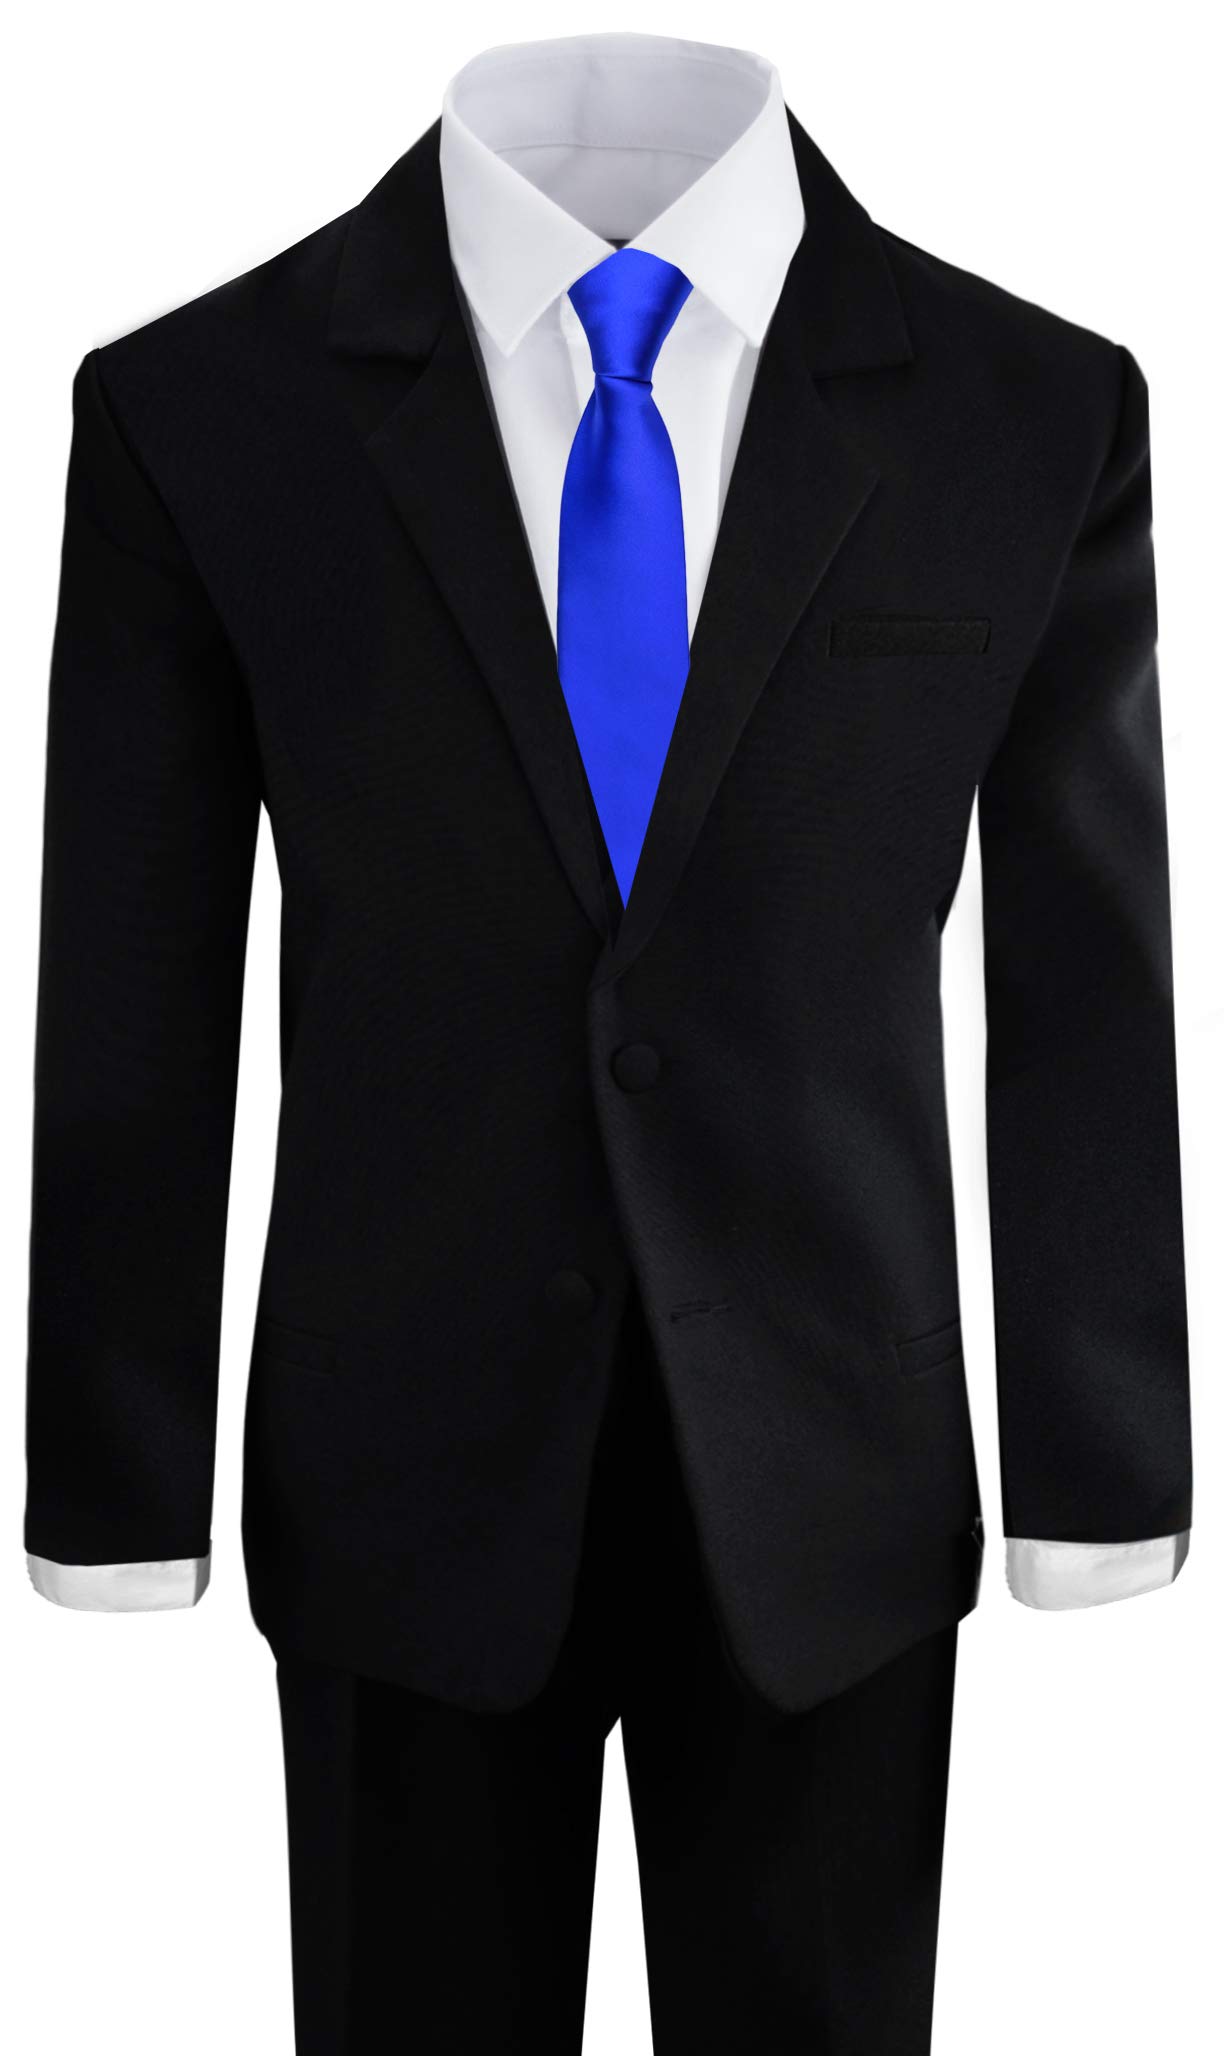 Black n Bianco Boys Formal Black Suit with Shirt and Vest (Medium 6-12 Months, Black with Blue Tie)